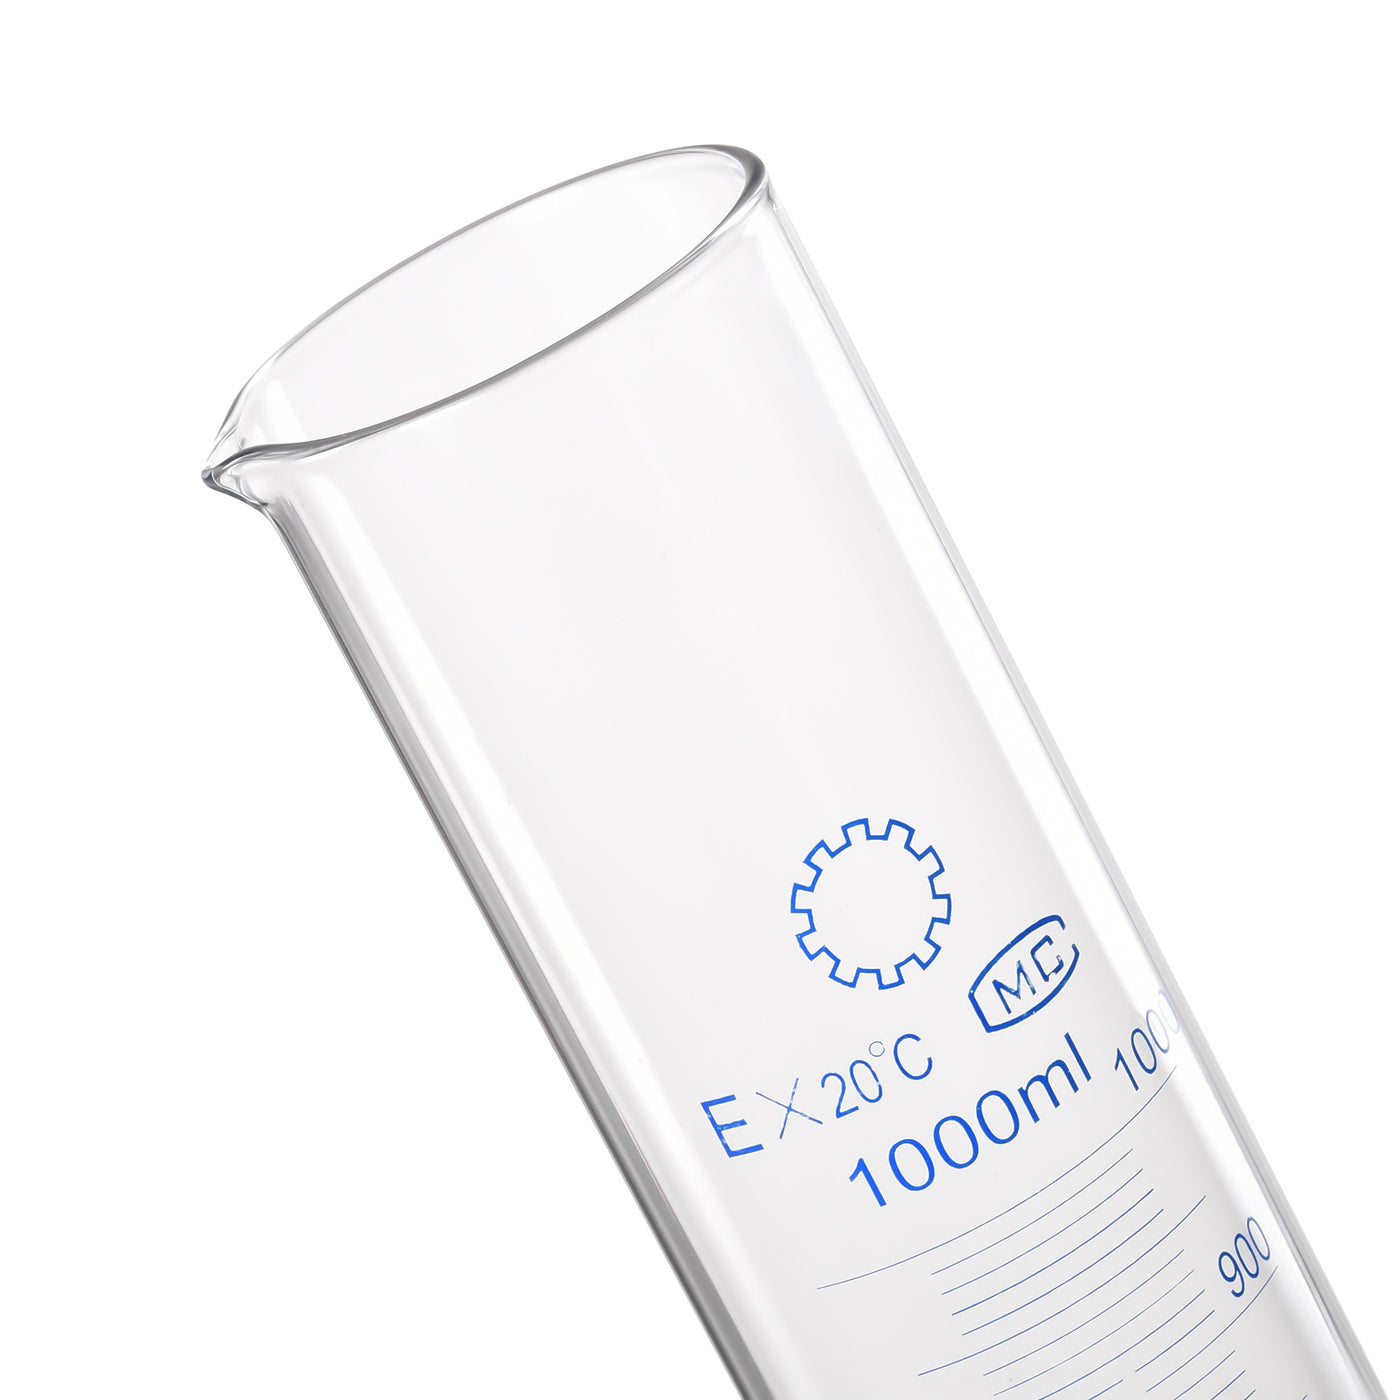 uxcell Uxcell Borosilicate Glass Graduated Cylinder, 1000ml Measuring Cylinder, Blue Hex Base